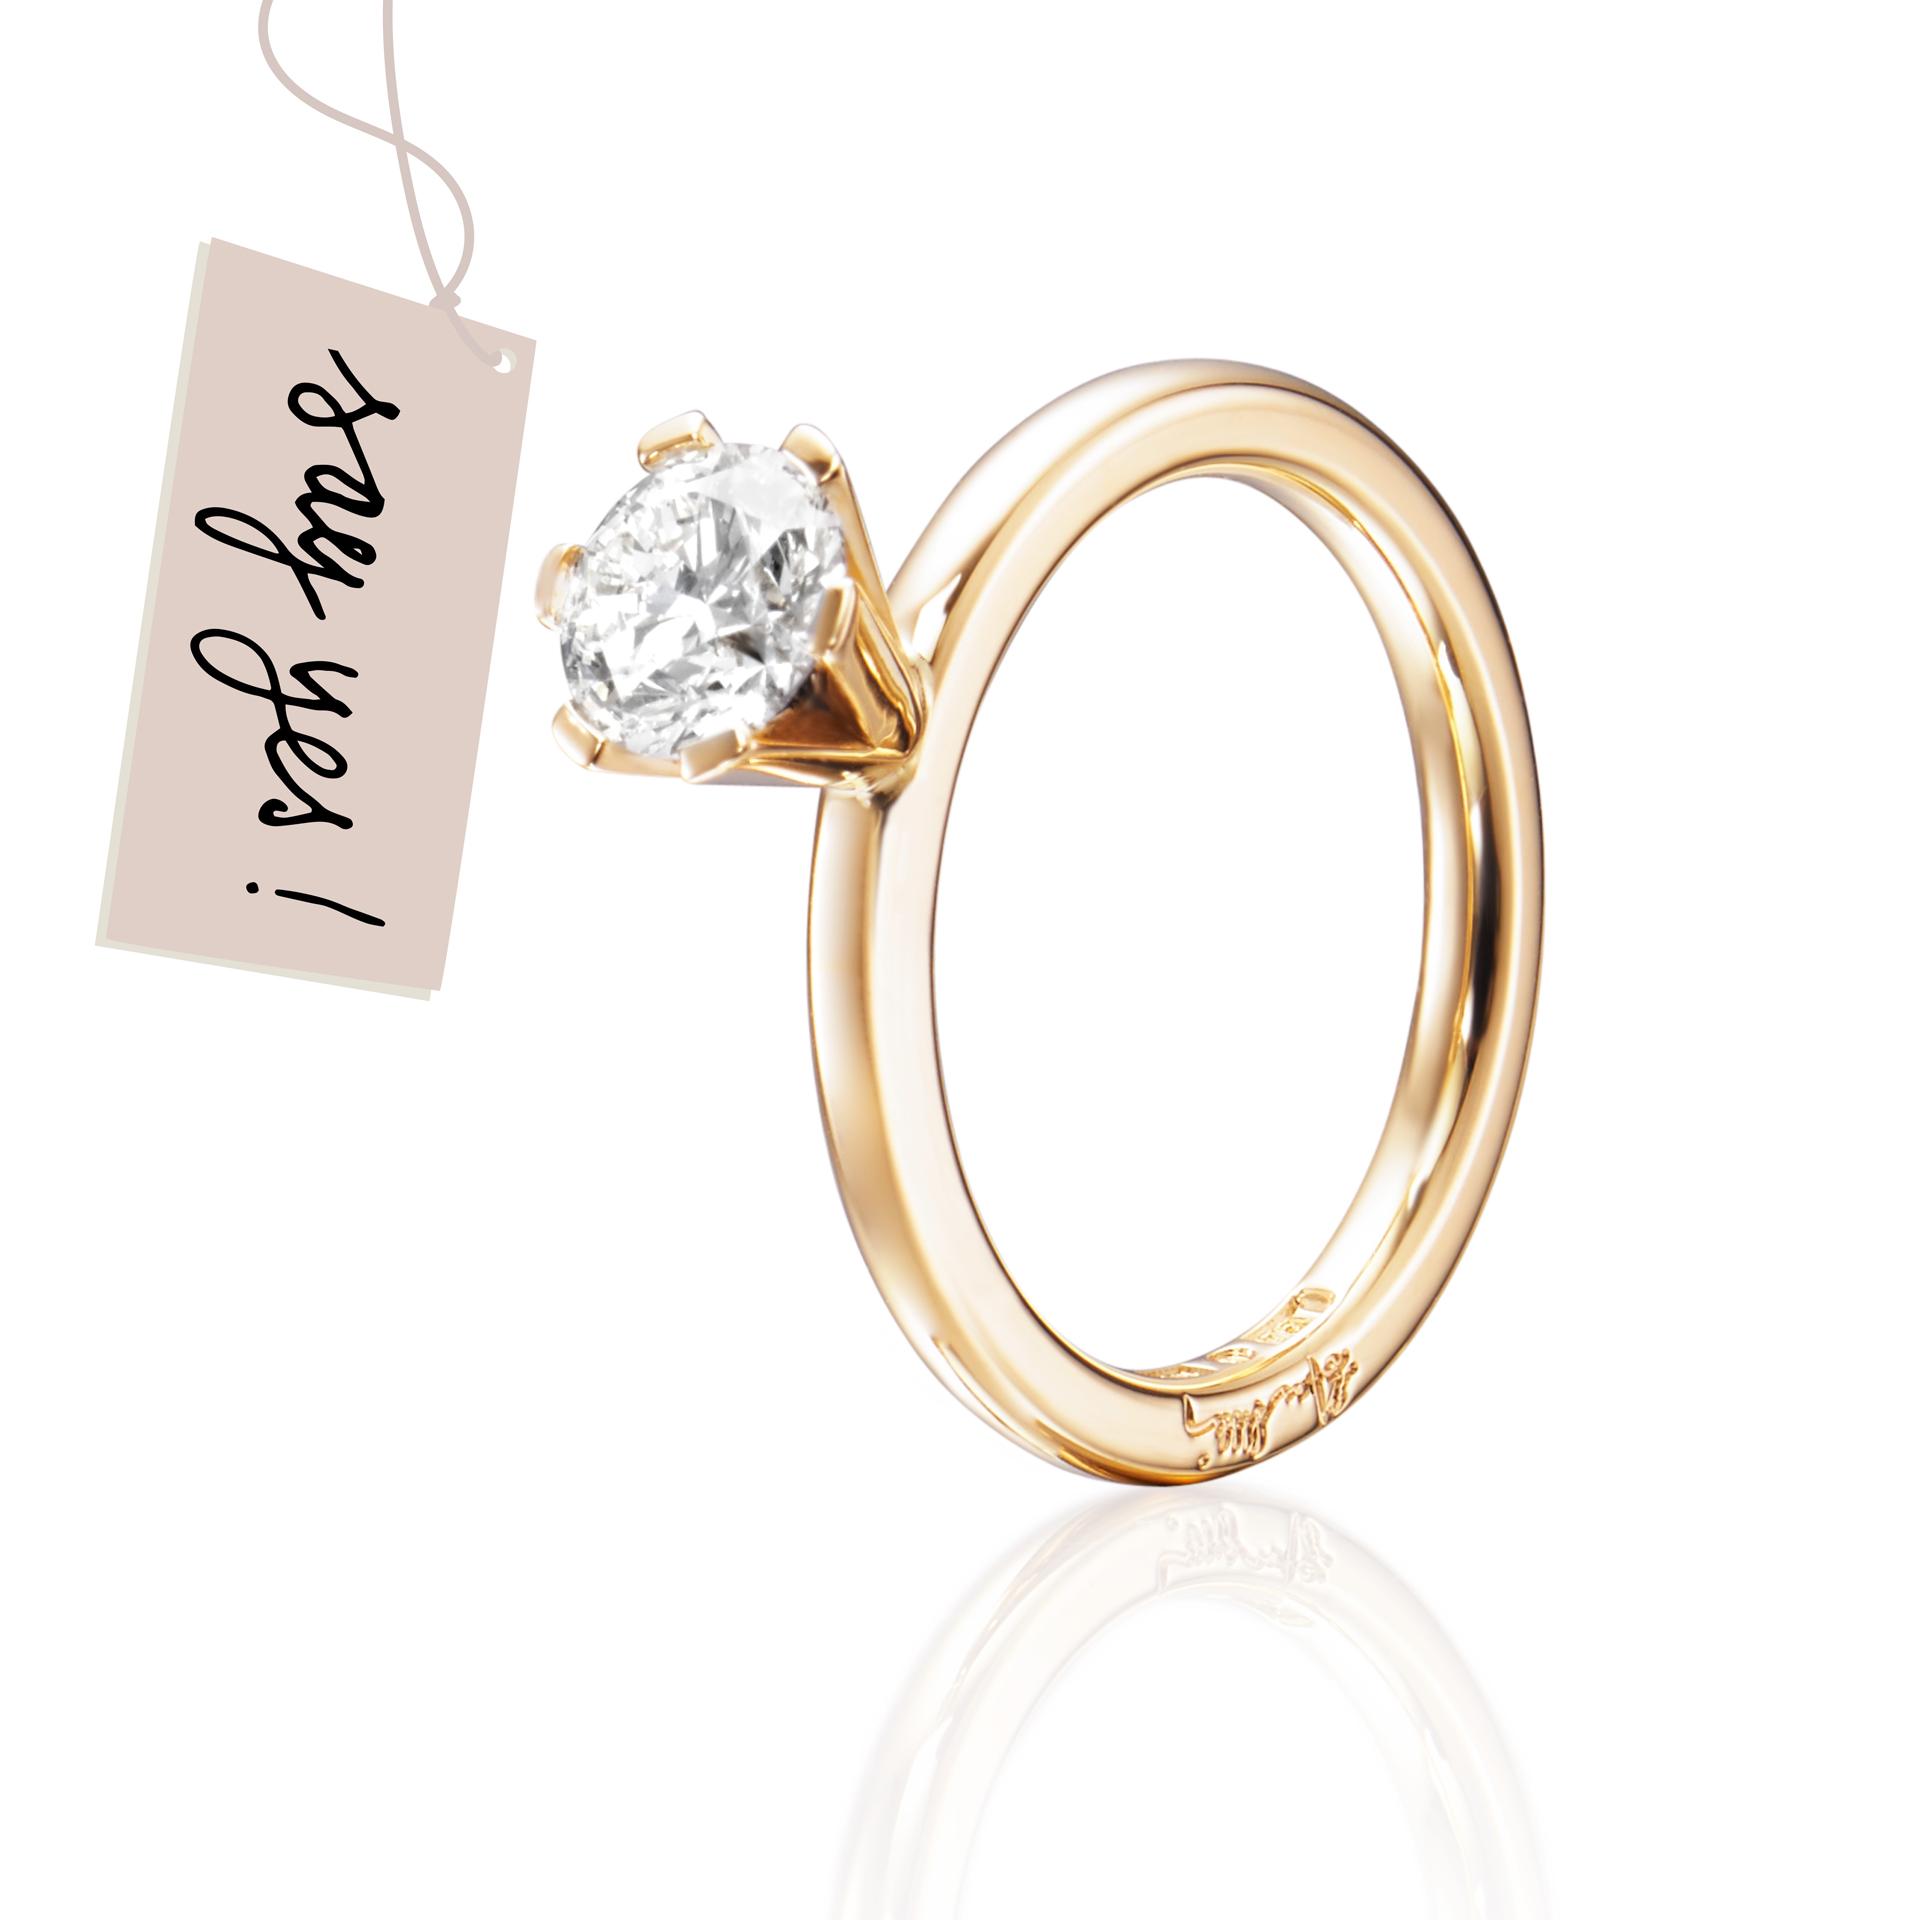 HIGH ON LOVE RING 1.0 CT